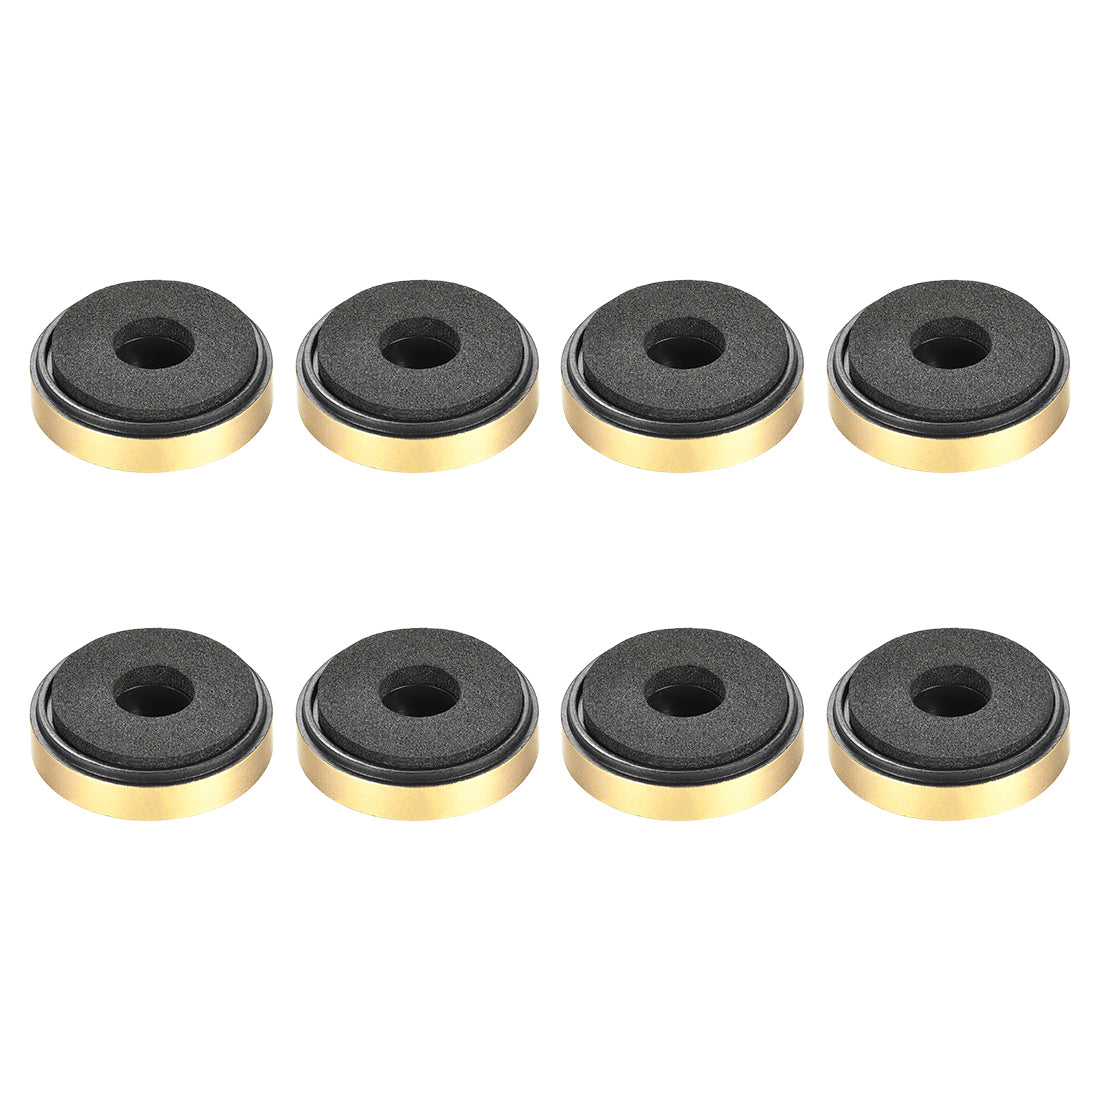 uxcell Uxcell 8 Pcs D30xH8mm Plastic Feet Anti-Vibration Base Pad Stand for Speaker Guitar Amplifier HiFi Gold Tone